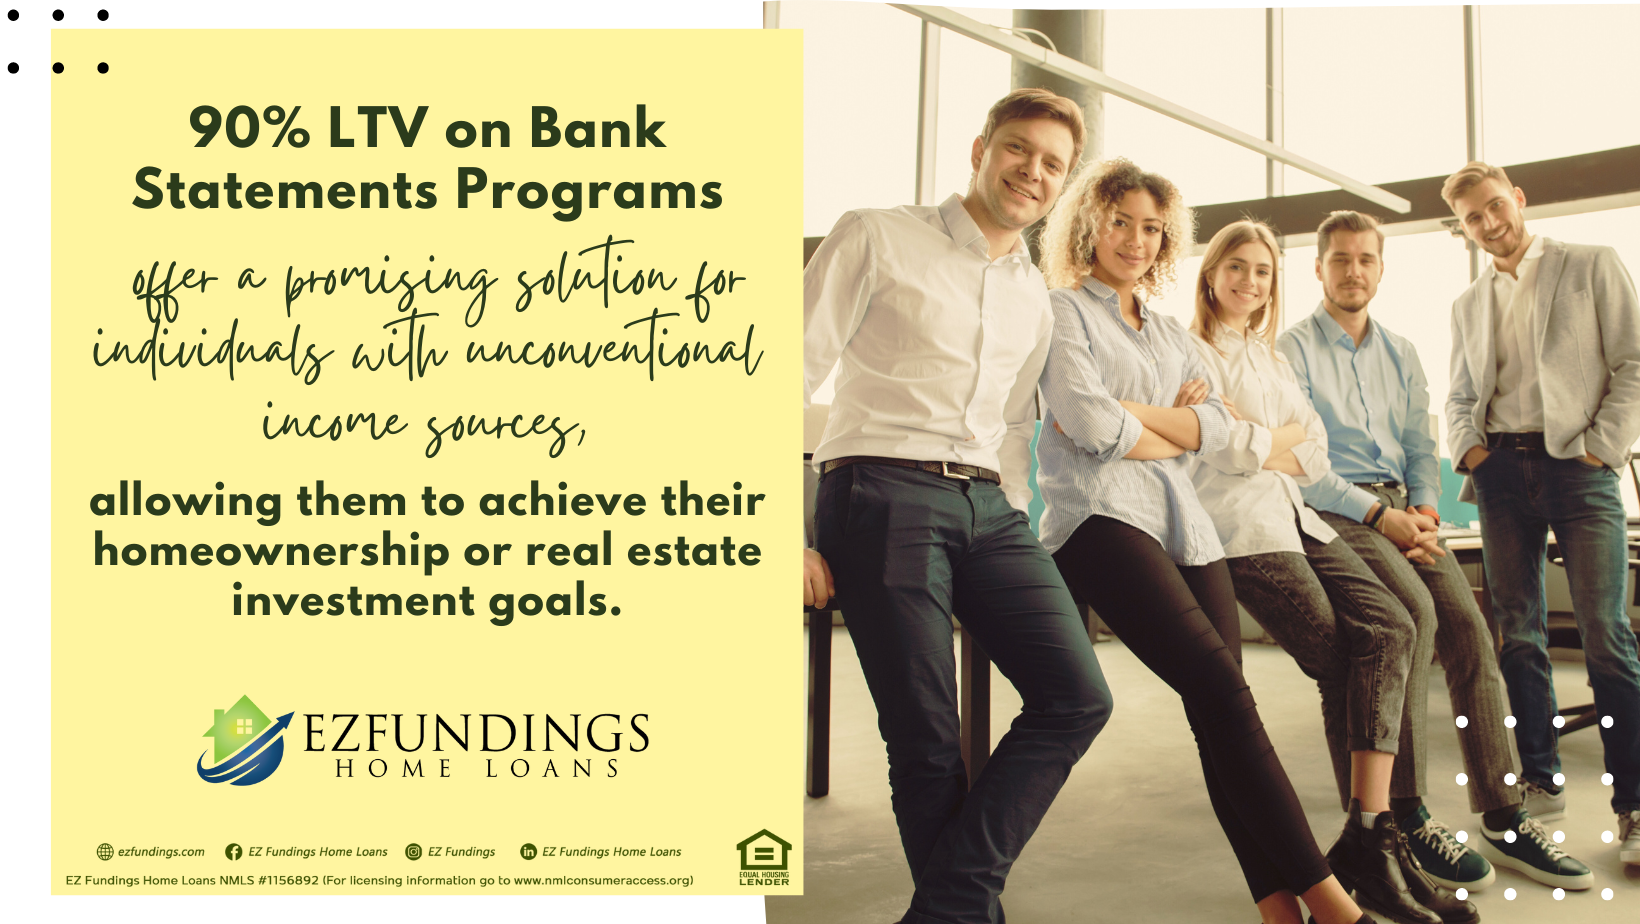 90% LTV on bank statement programs for individuals with unconventional income sources.